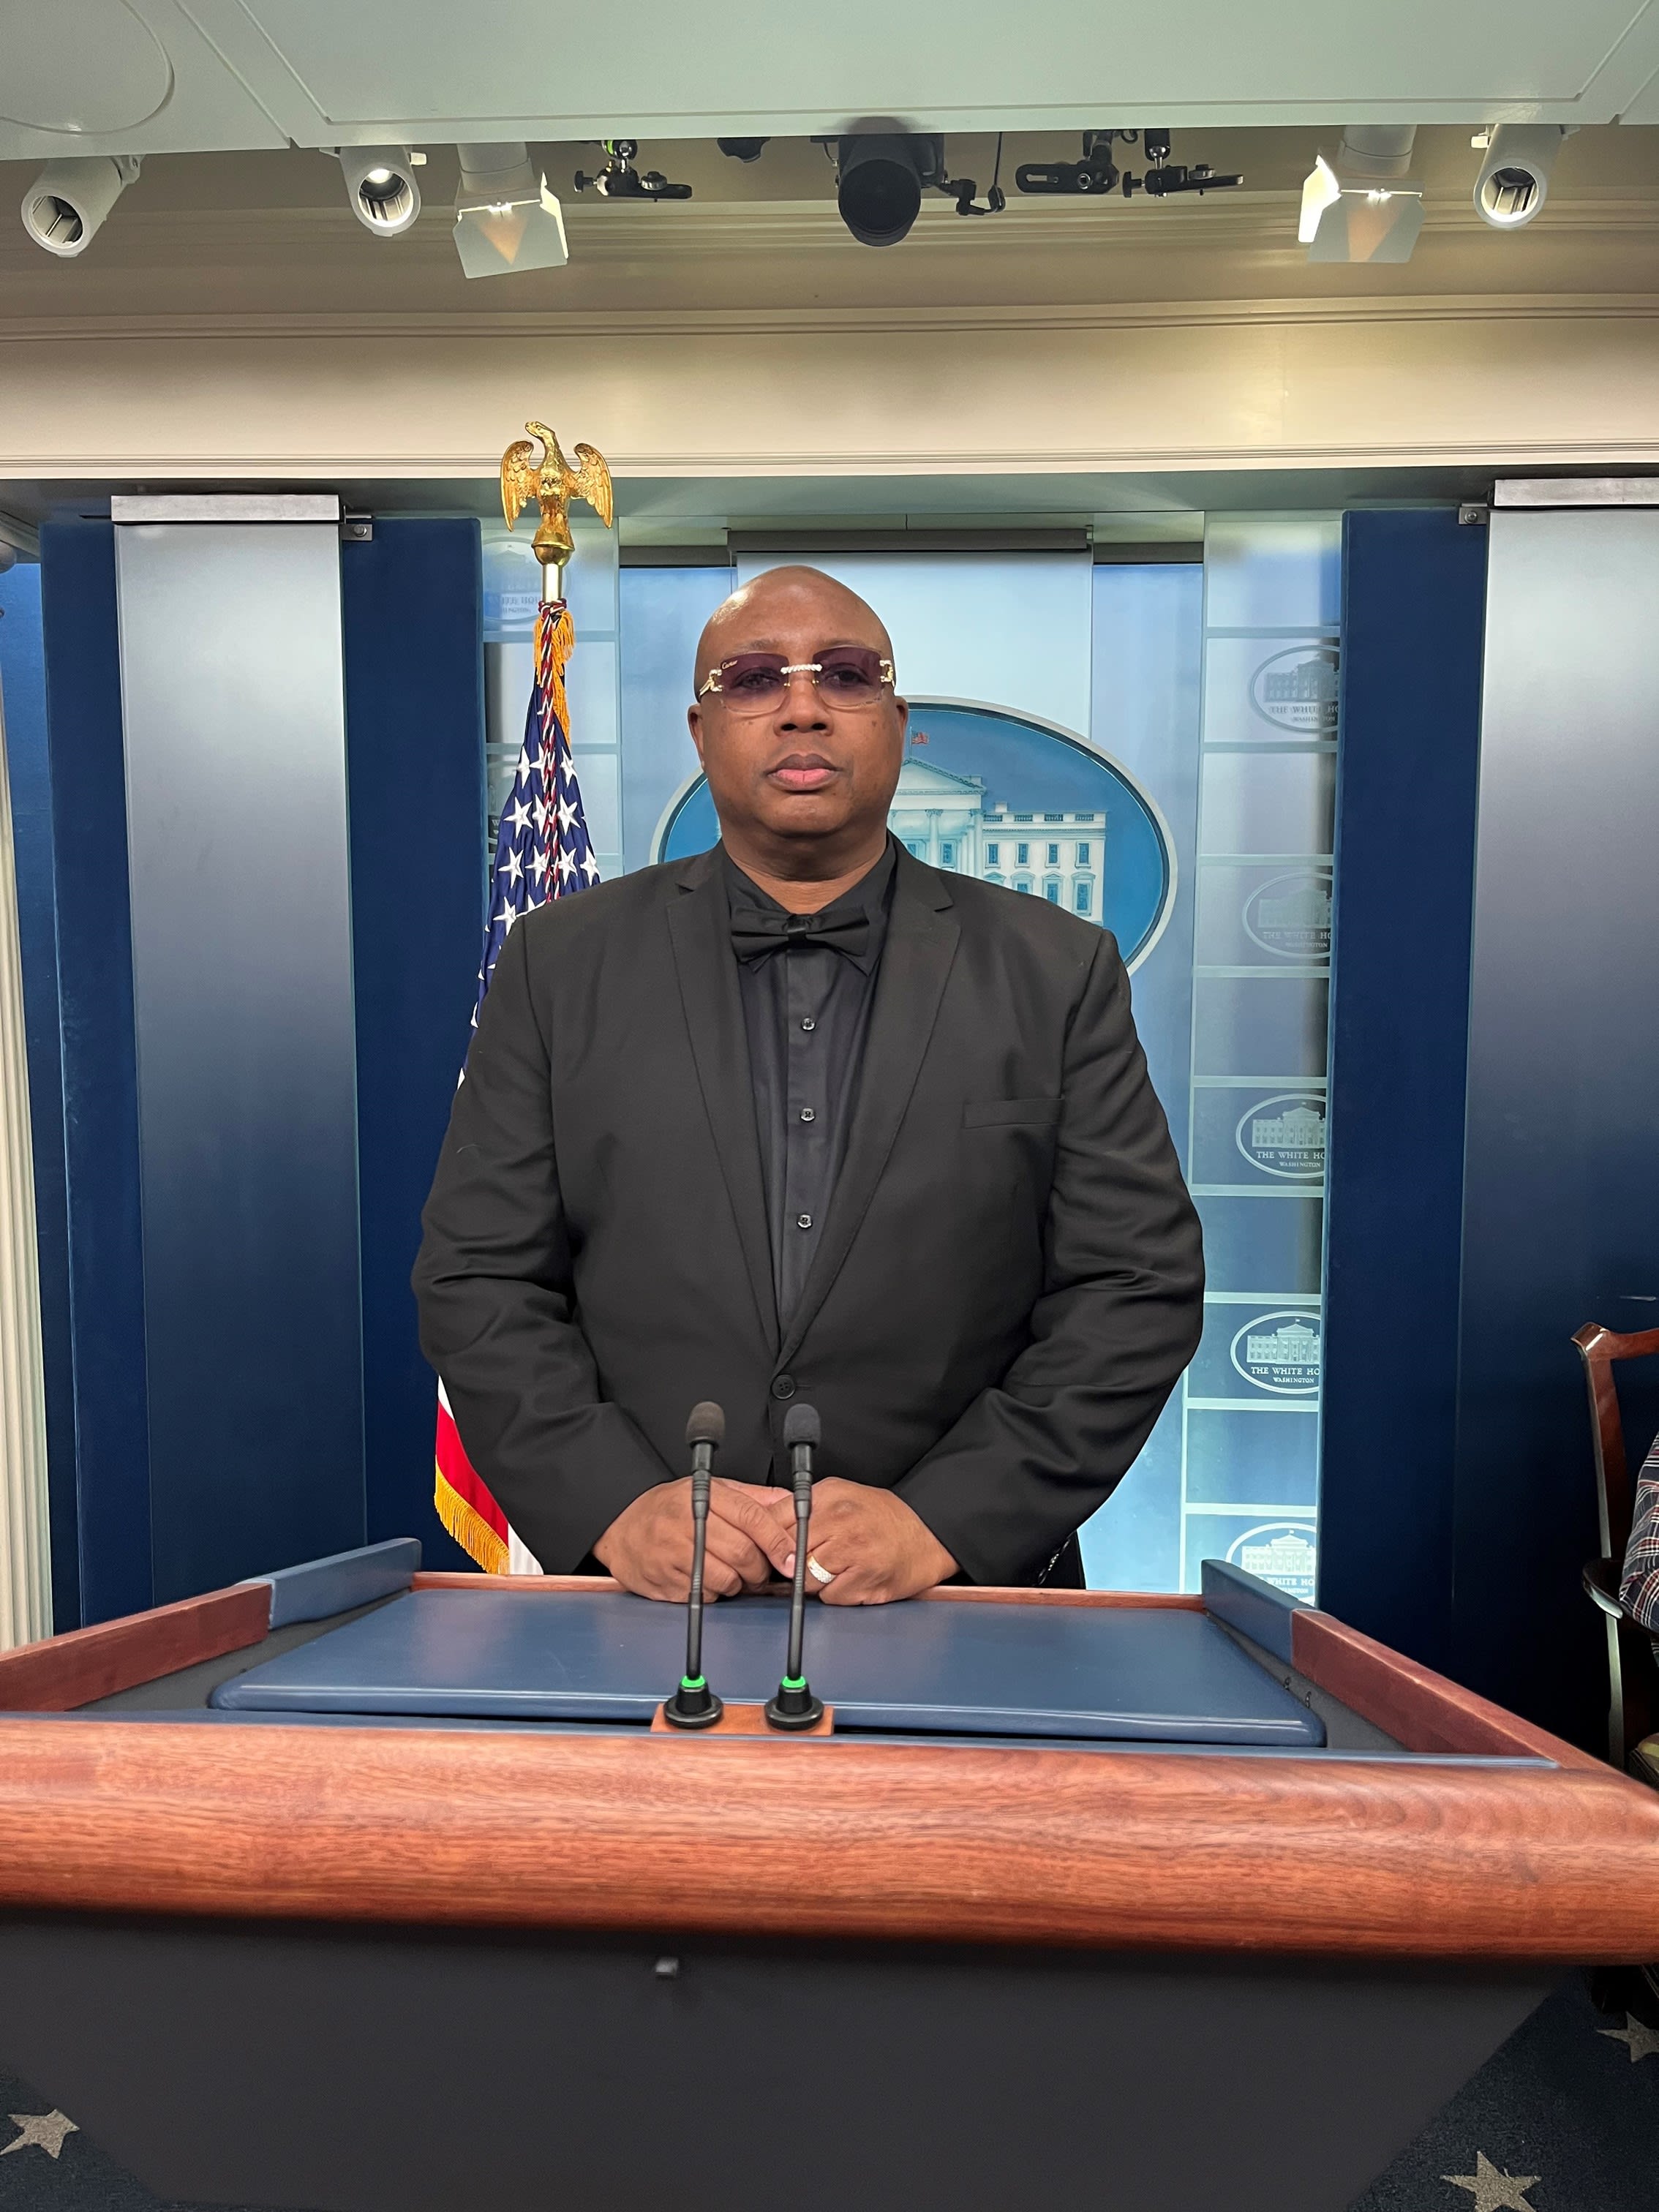 E-40 photographed at podium in White House briefing room.